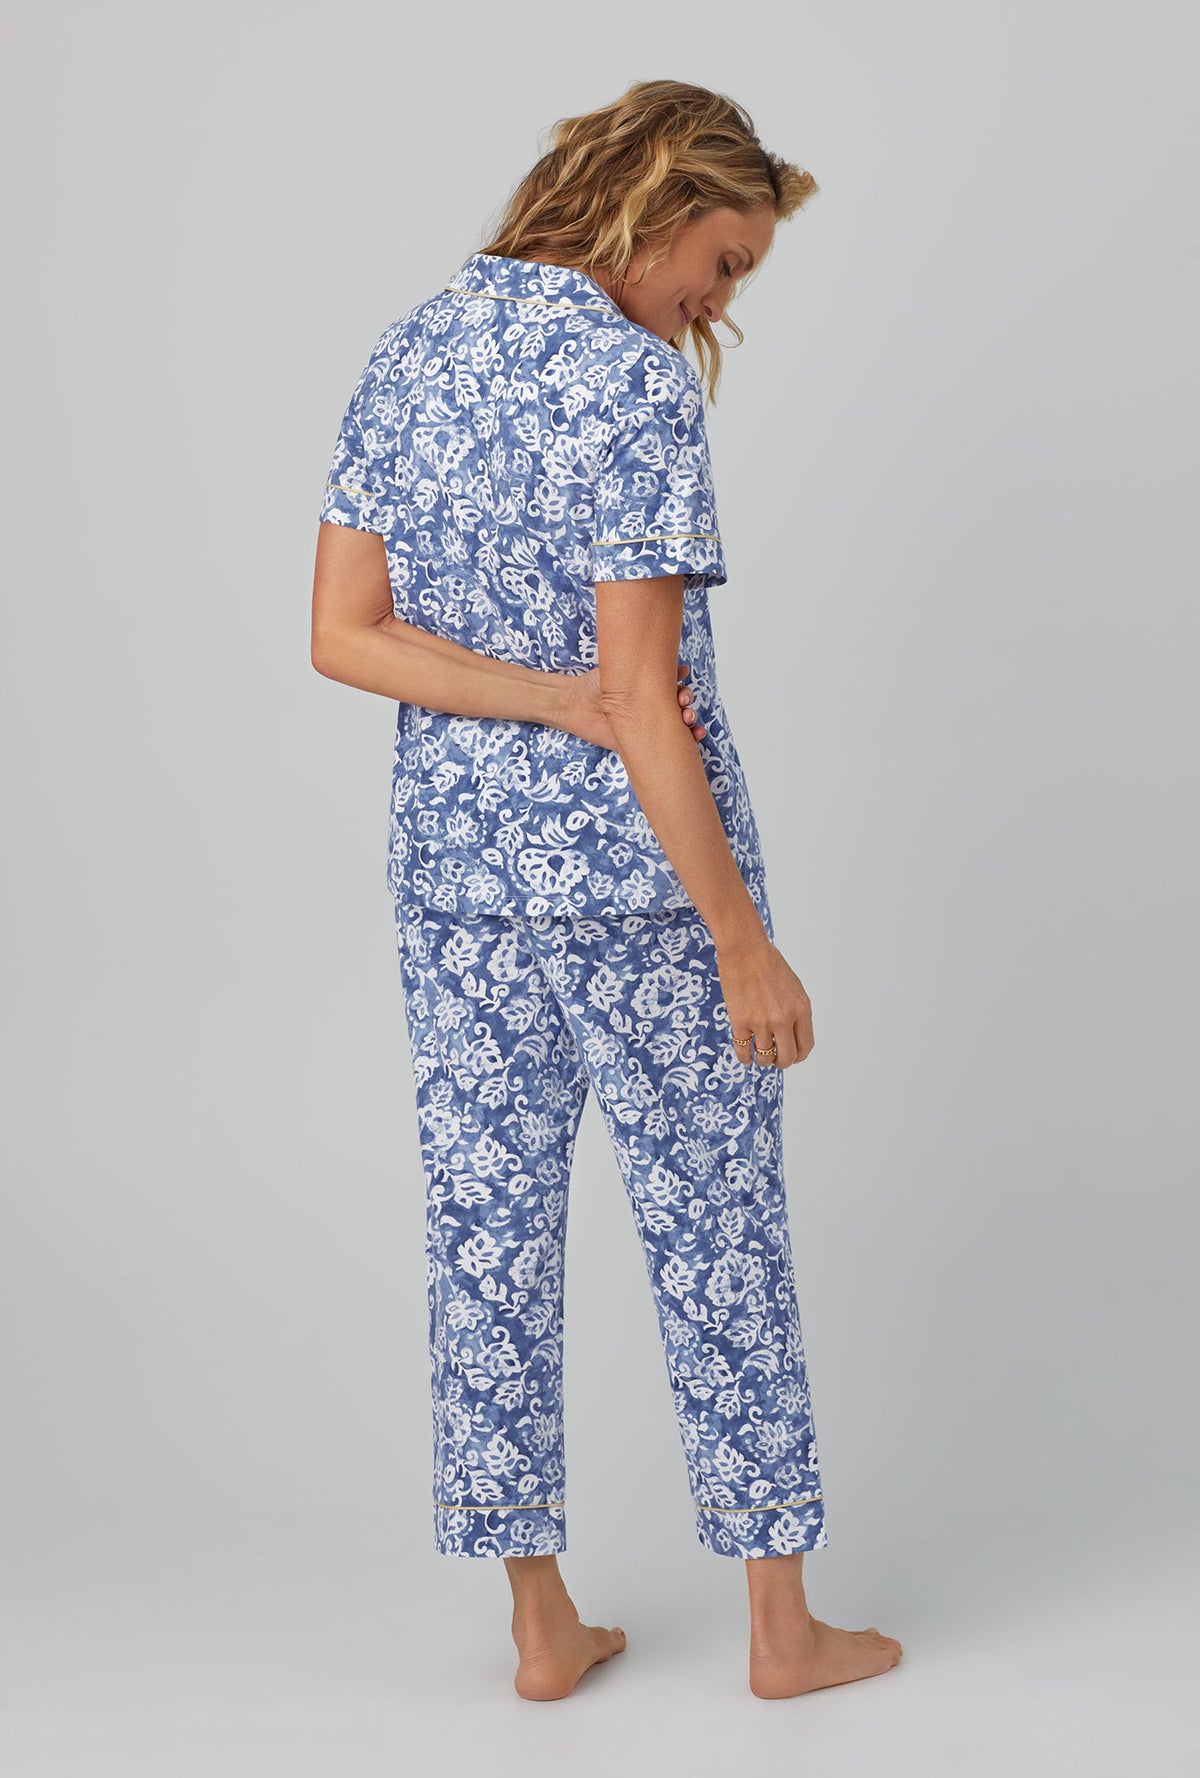 A lady wearing Short Sleeve Classic Stretch Jersey Cropped PJ Set with autumn eve print